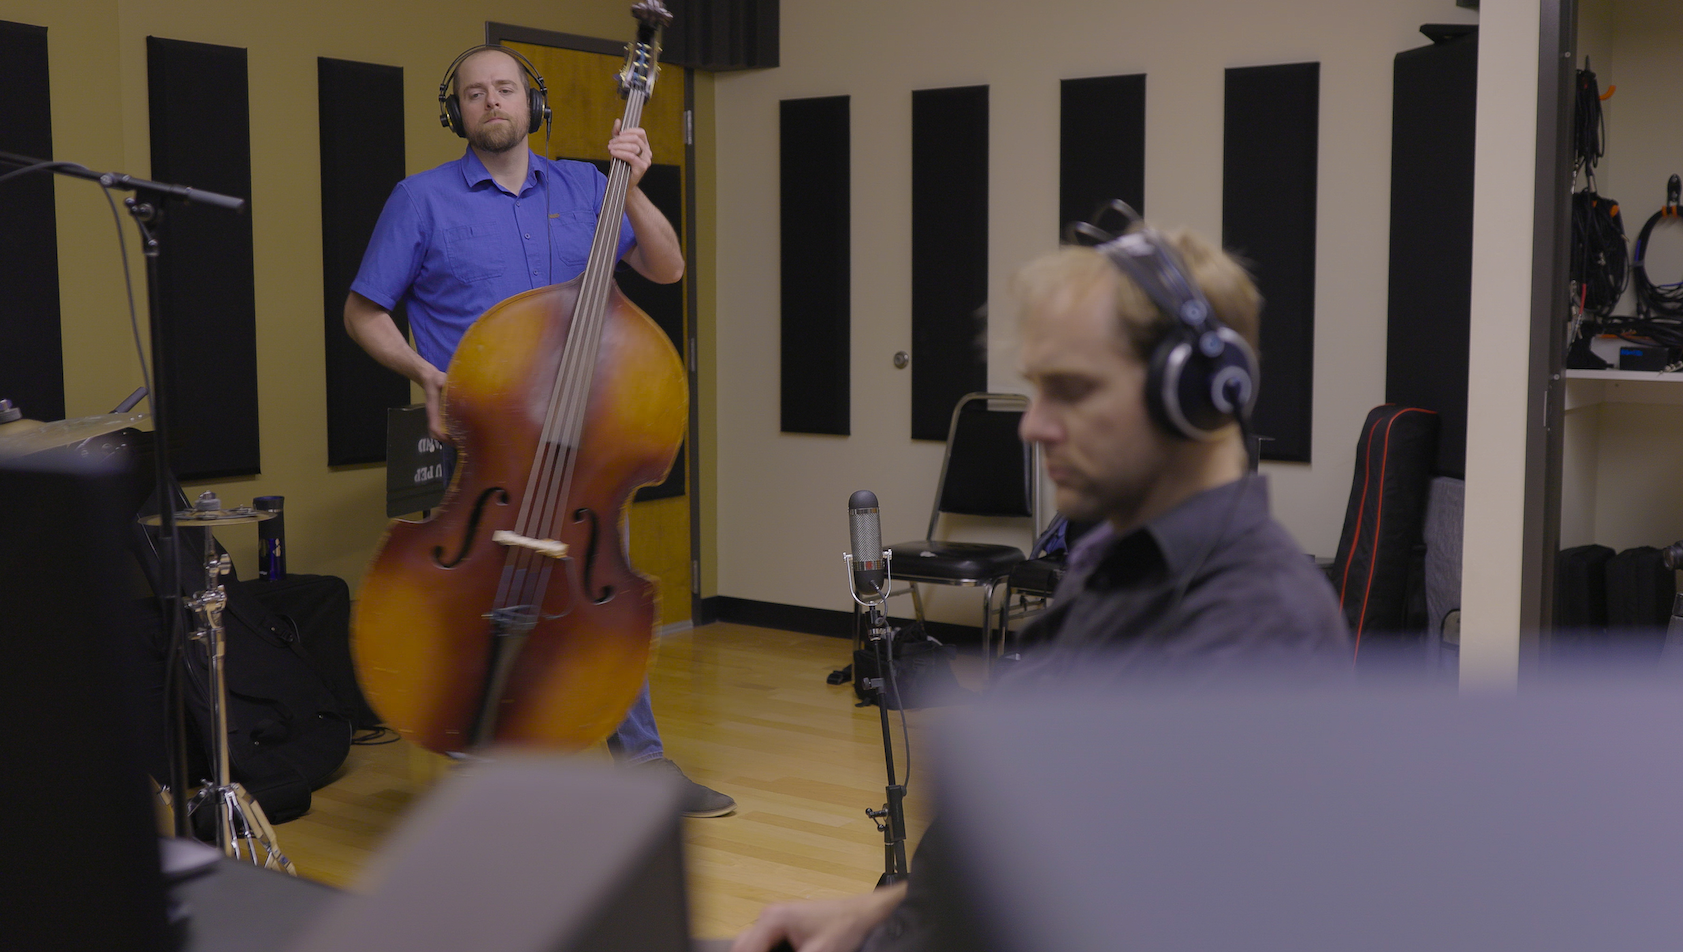 Jon Armstrong, associate professor of music and director of jazz studies at Idaho State University, and Paul Bodily, assistant professor of computer science at ISU, listen to a take during the recording session of “And I Think I.”